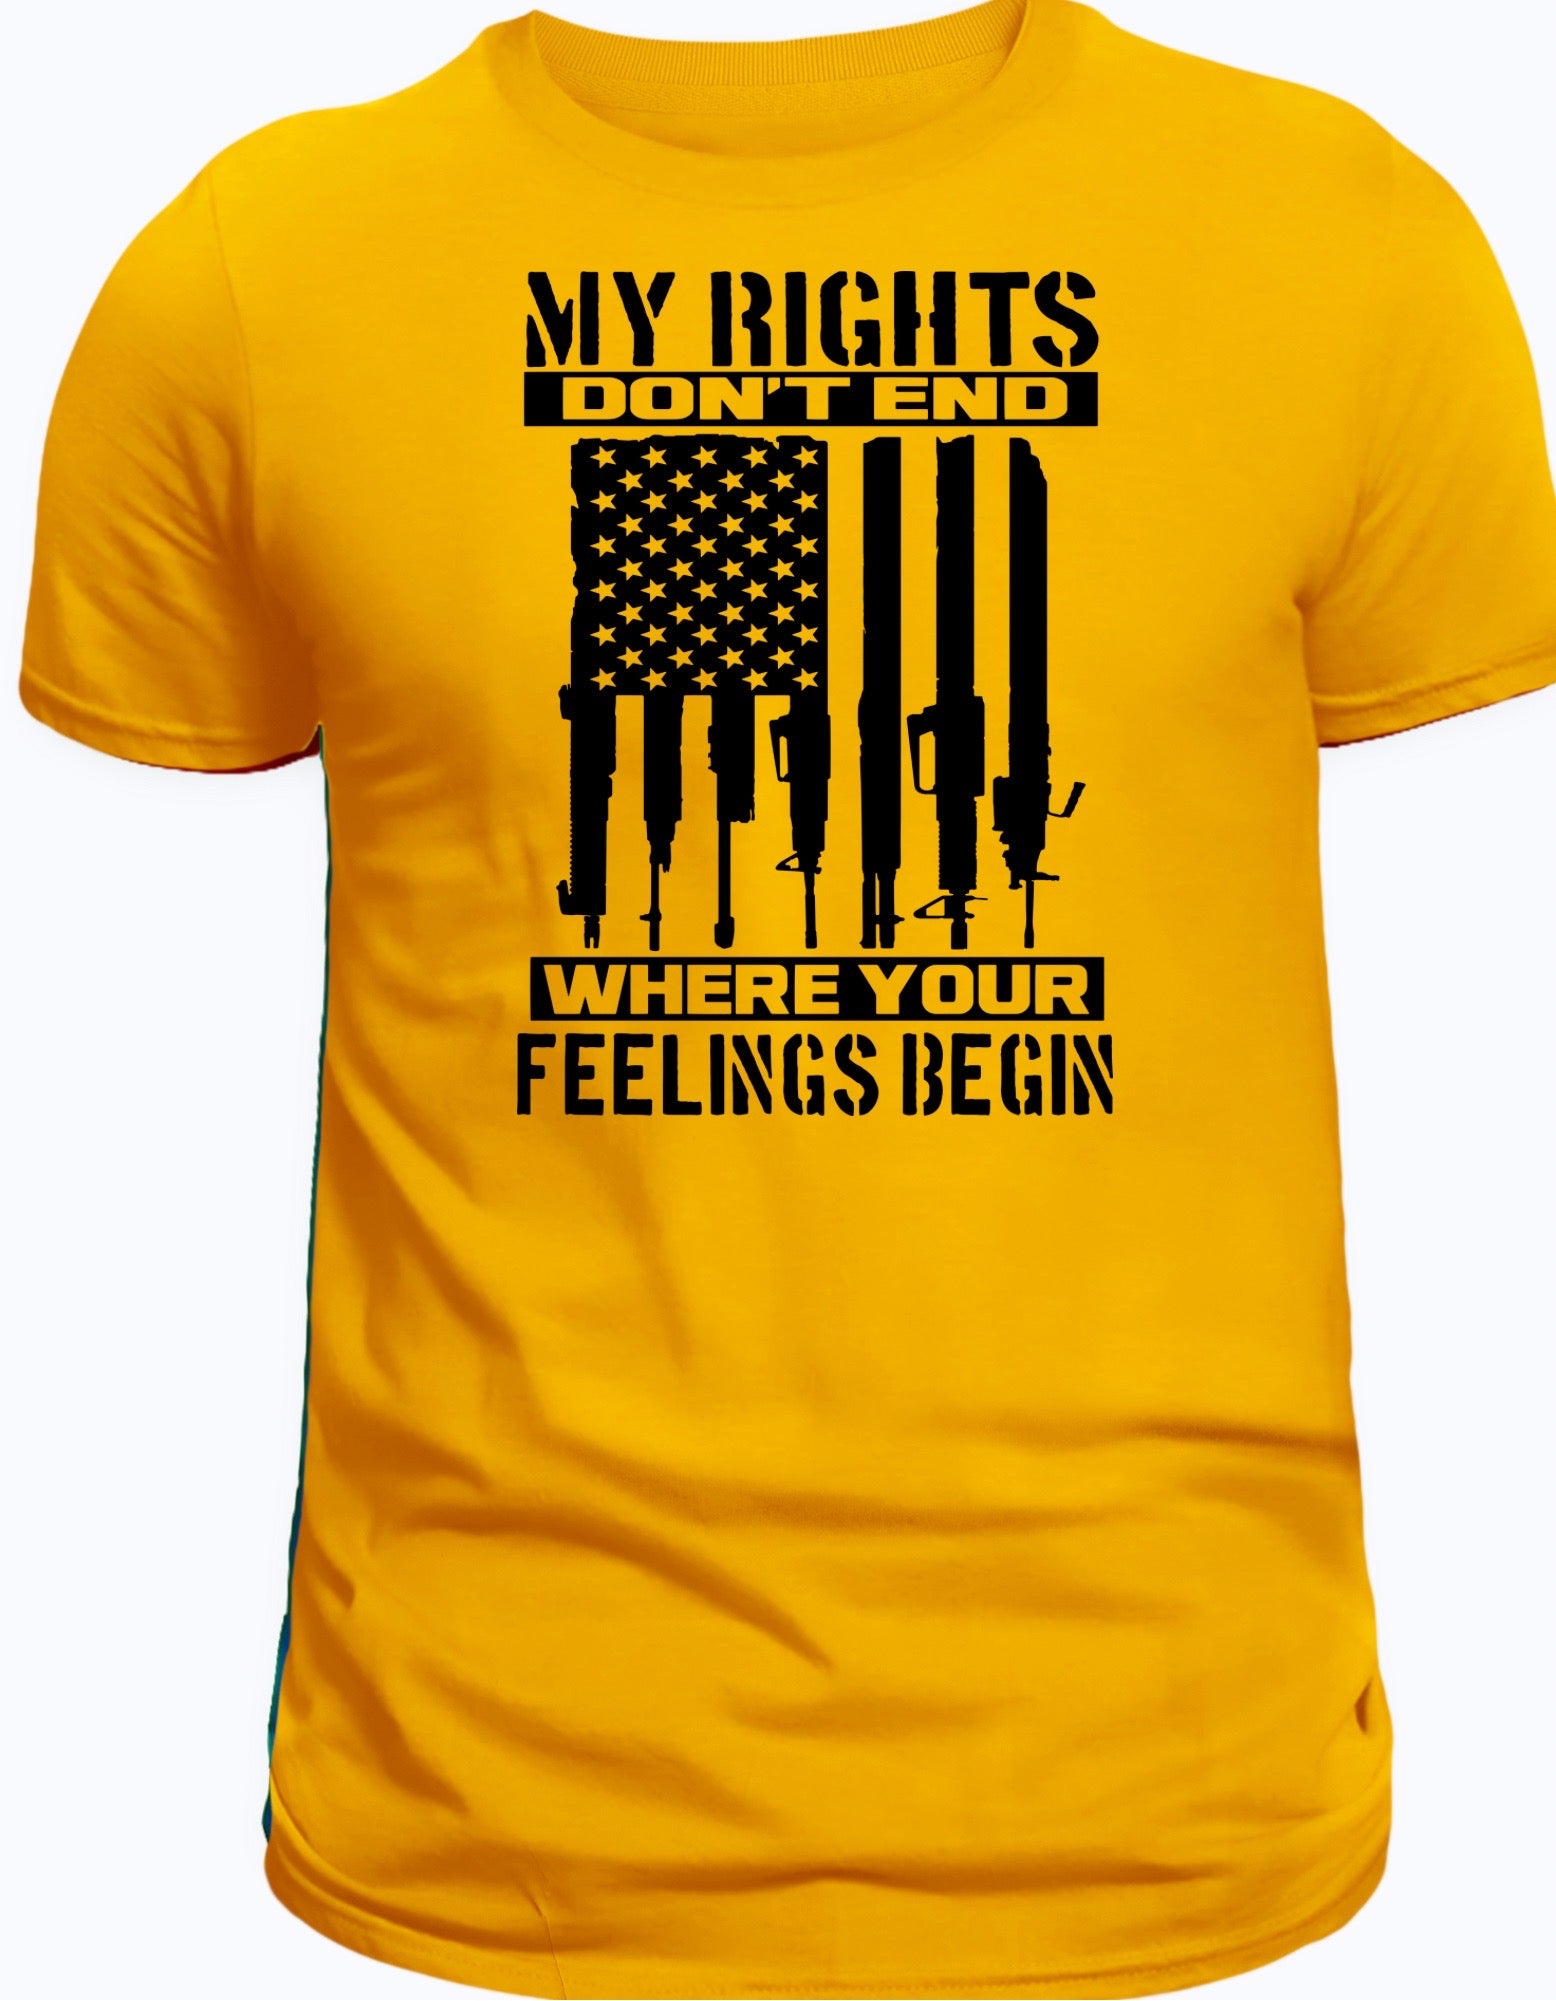 My rights don't end where your feelings begin T-shirt